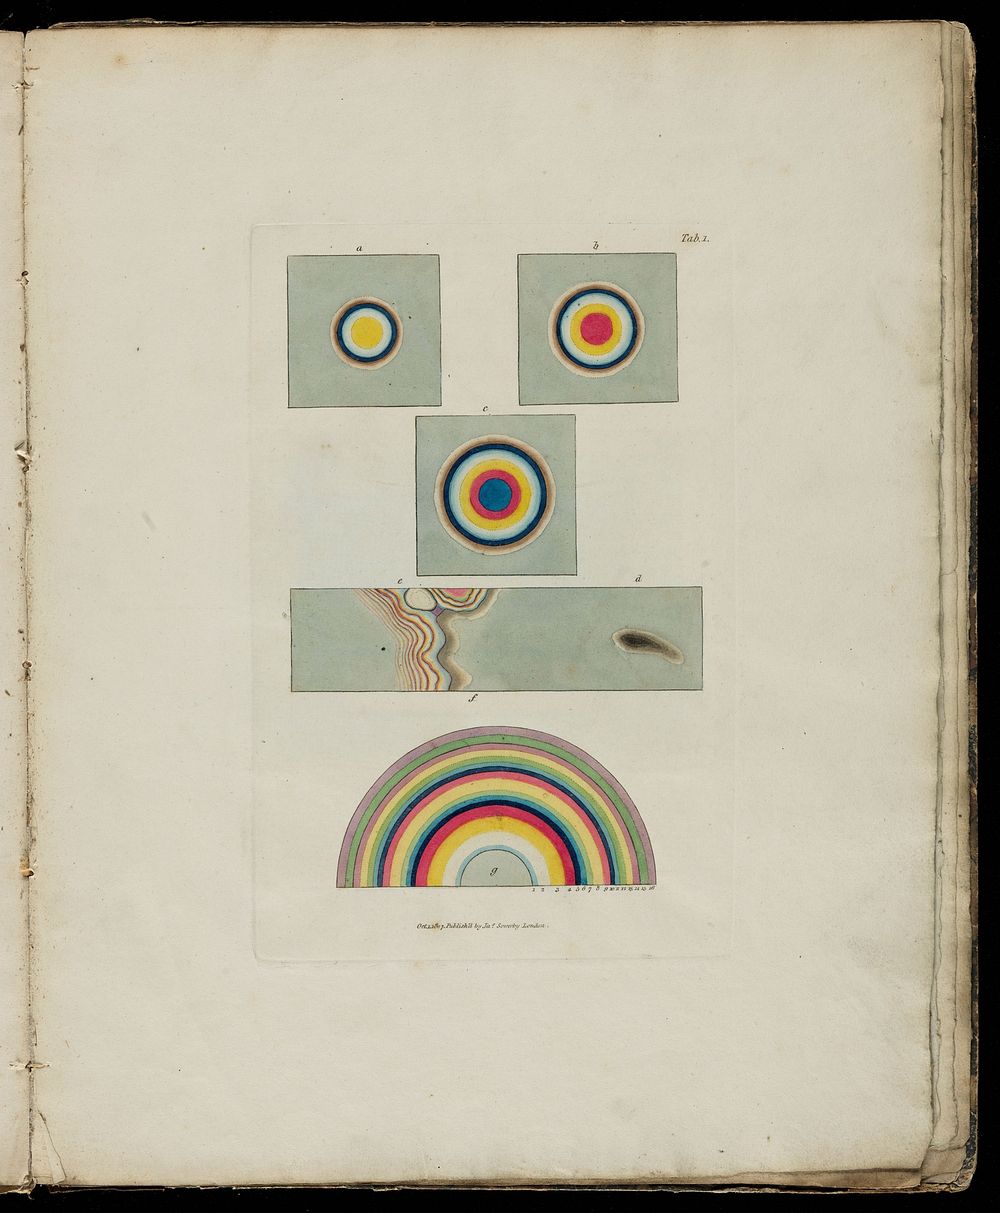 Table 1, J. Sowerby, A new elucidation of colours, 1809.